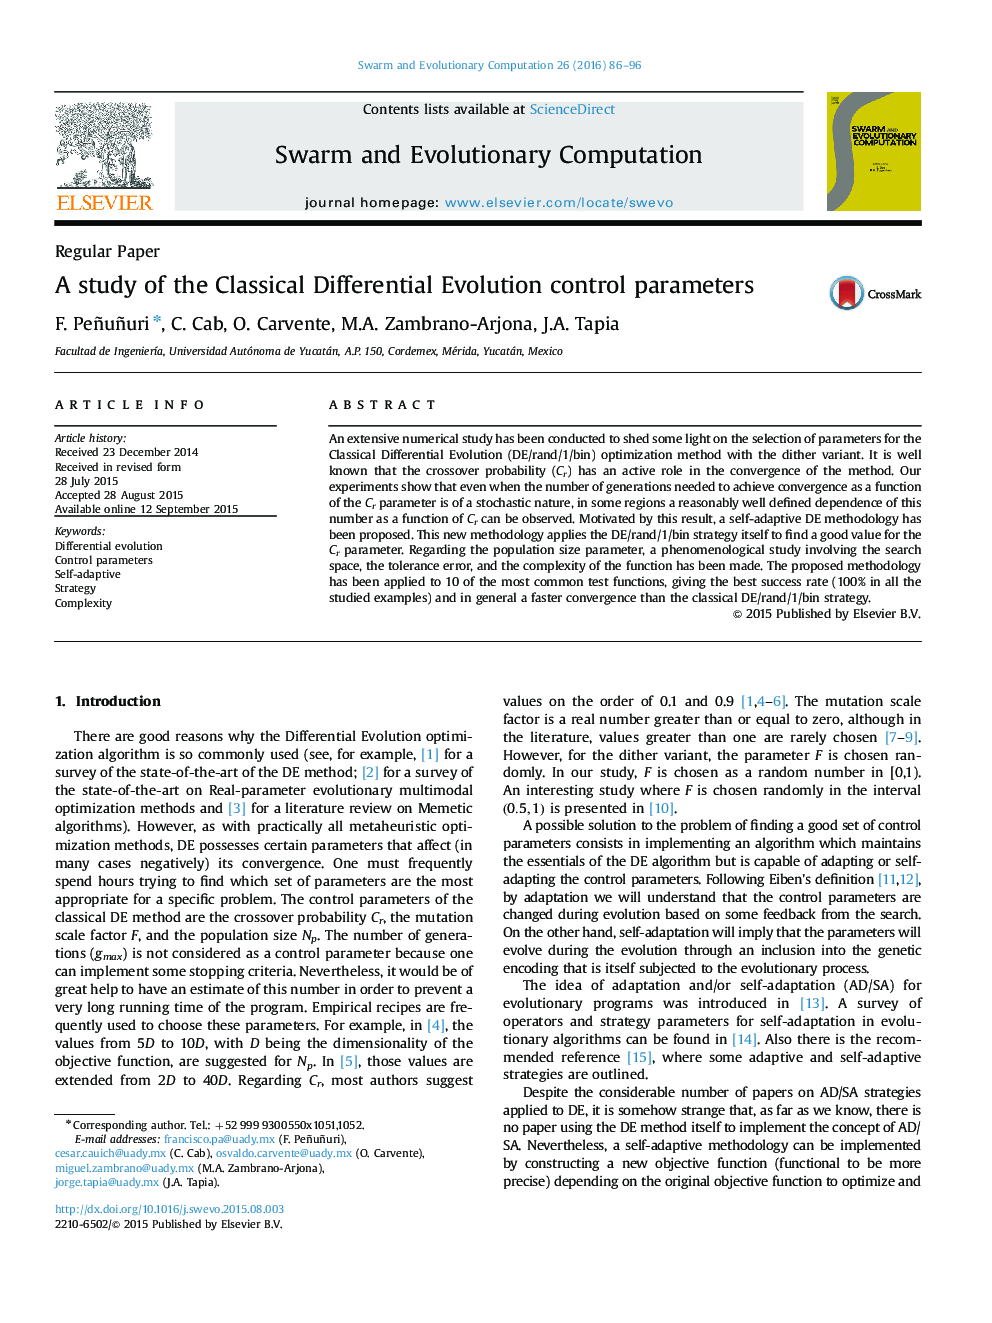 A study of the Classical Differential Evolution control parameters